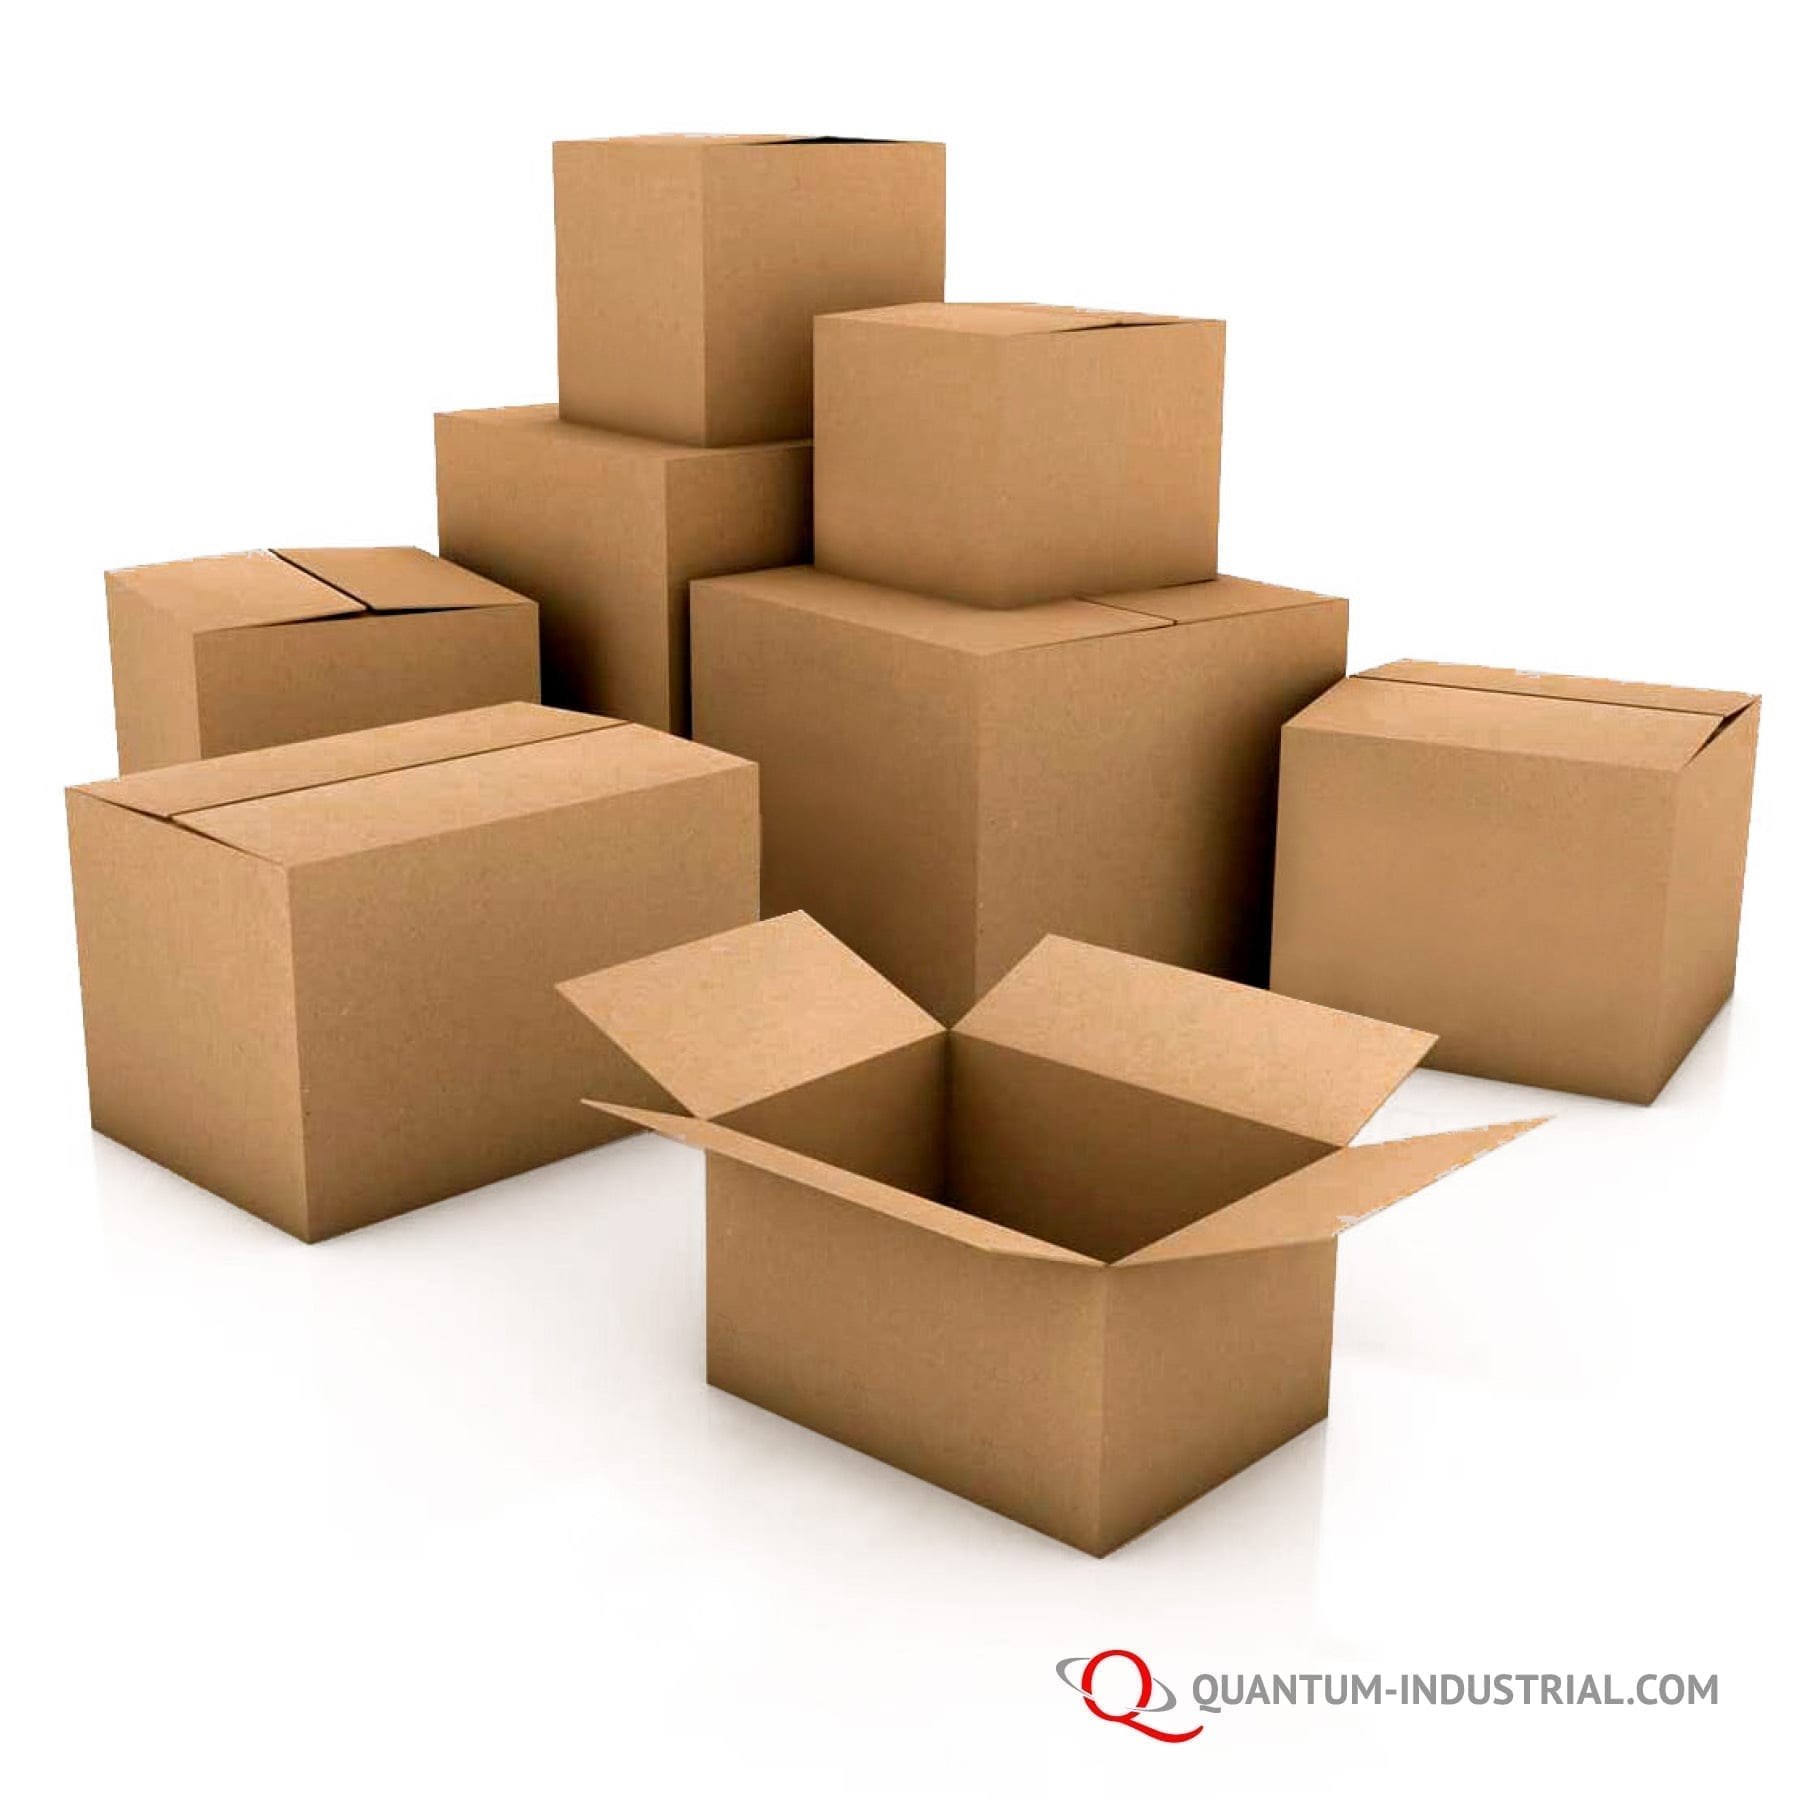 25 10x8x8 Cardboard Shipping Boxes Cartons Packing Moving Mailing Box